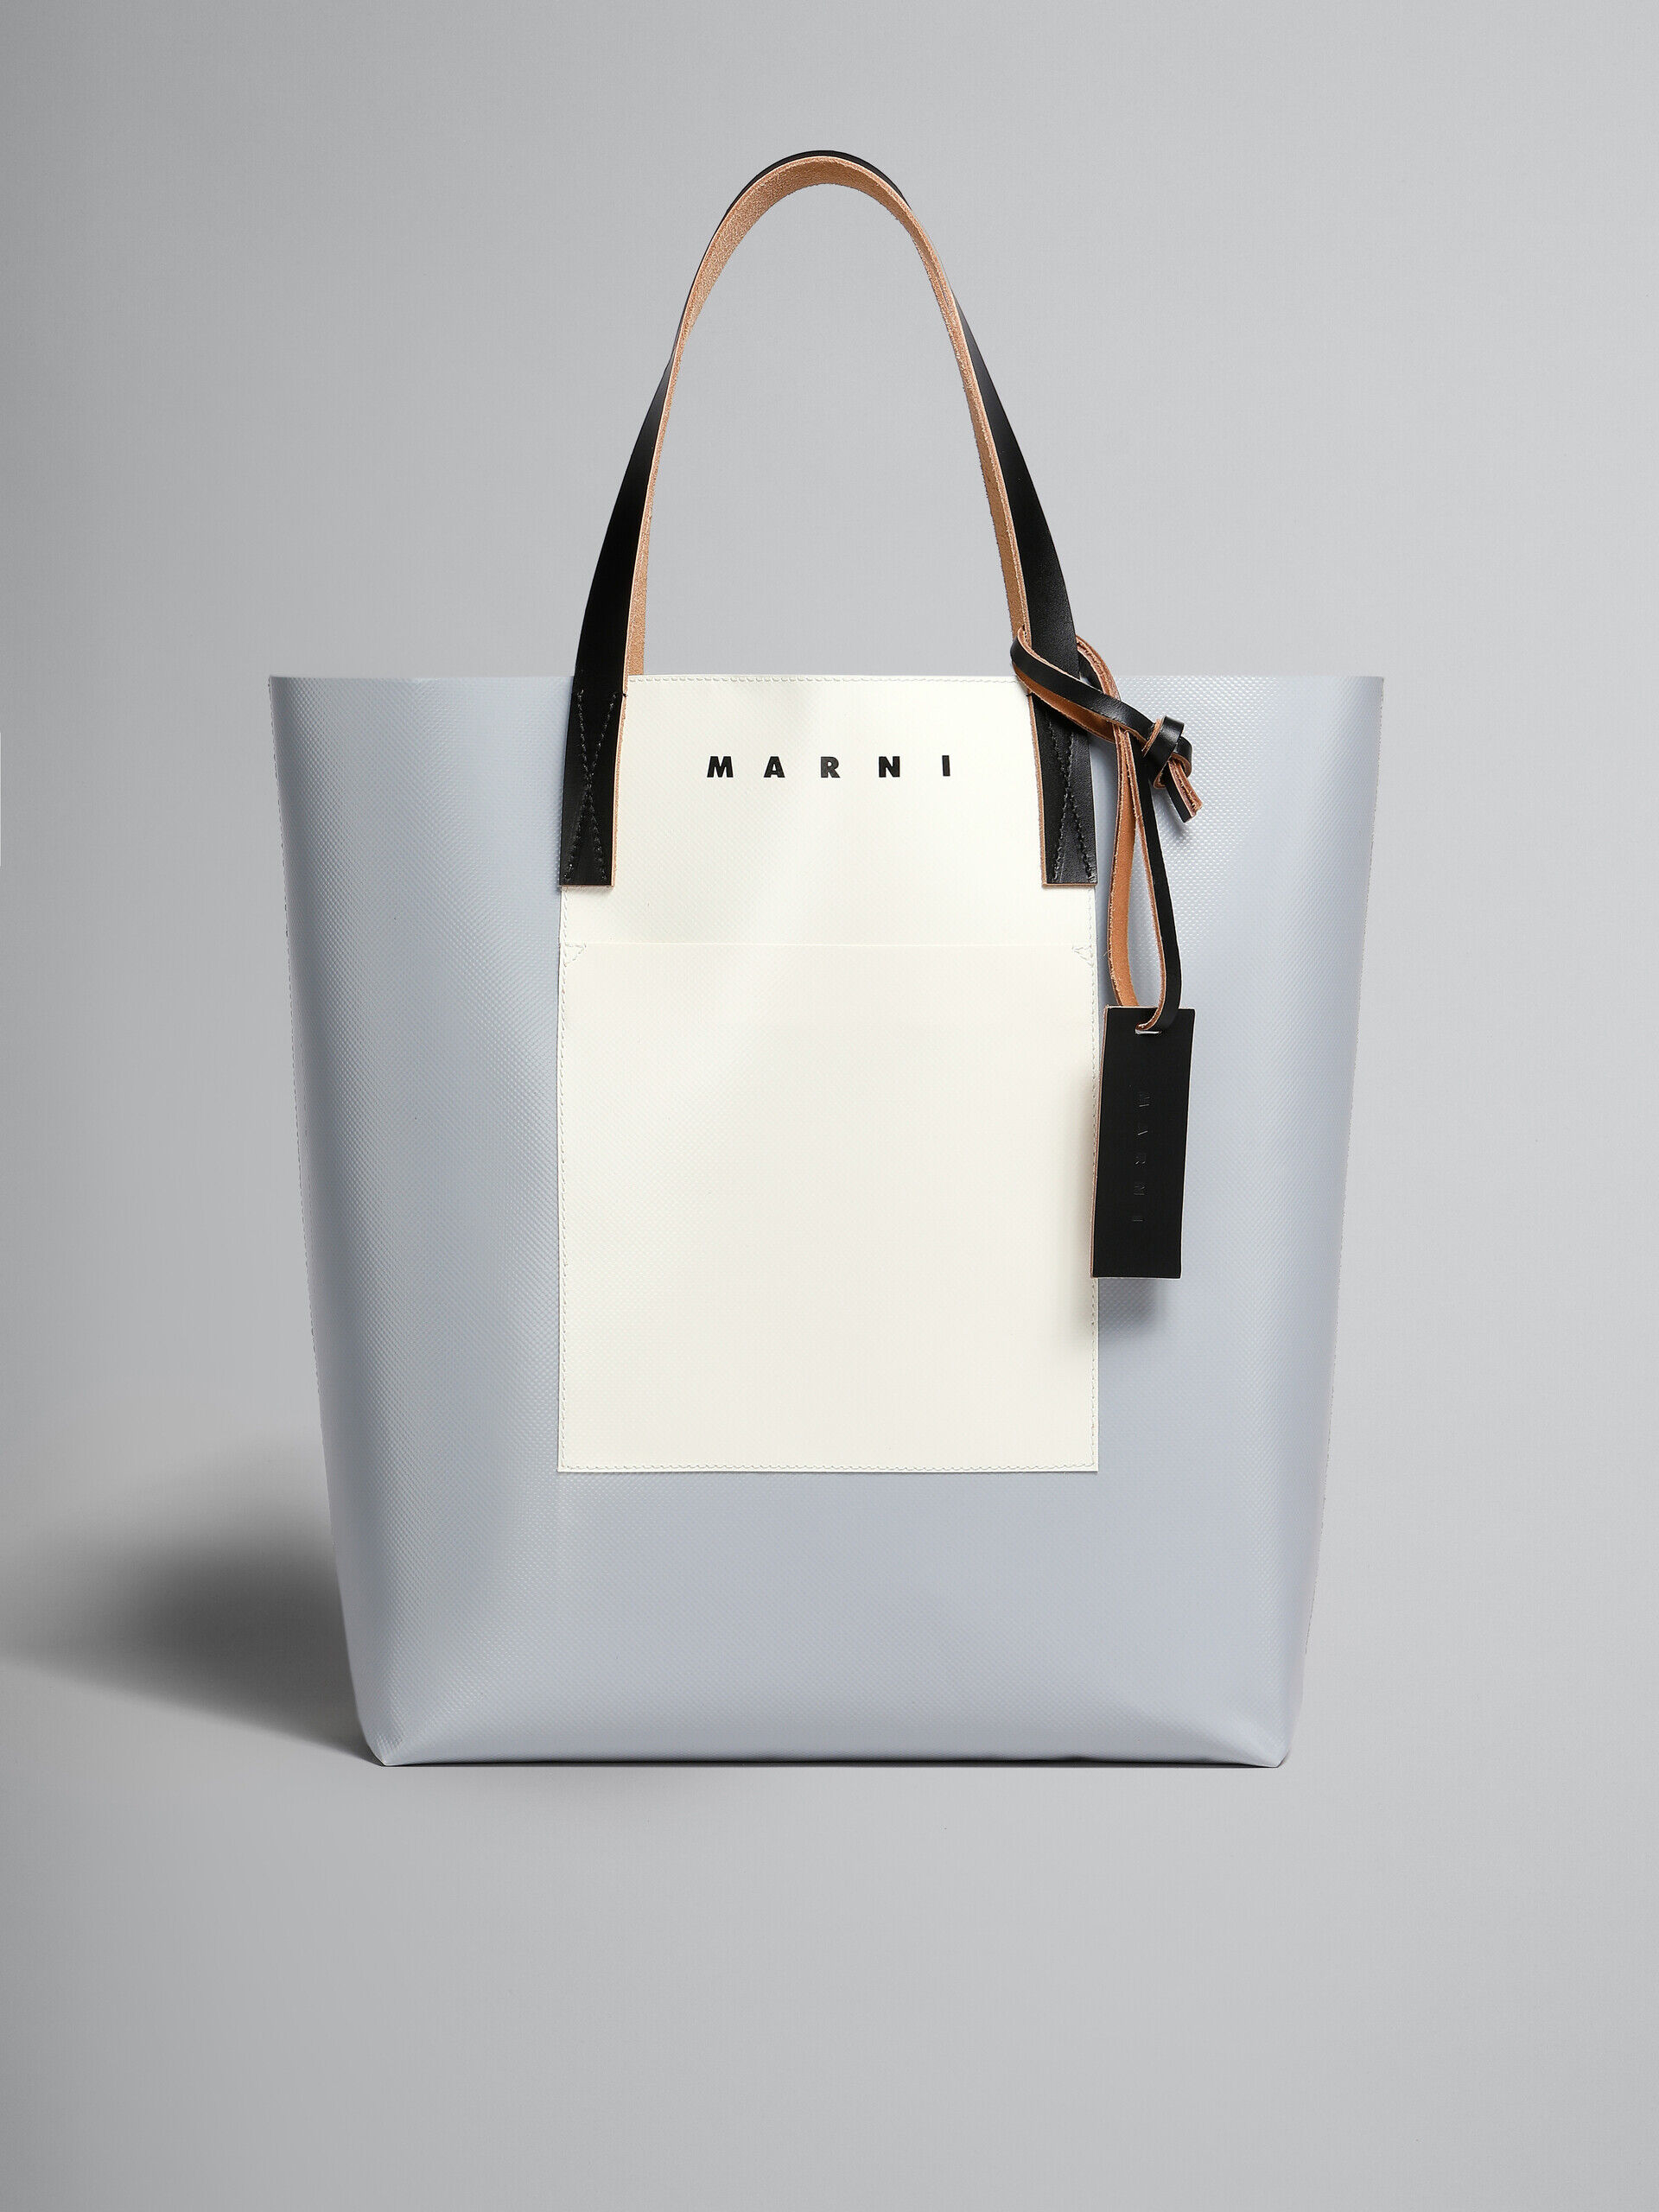 Tribeca Shopping Bag in silver and beige | Marni